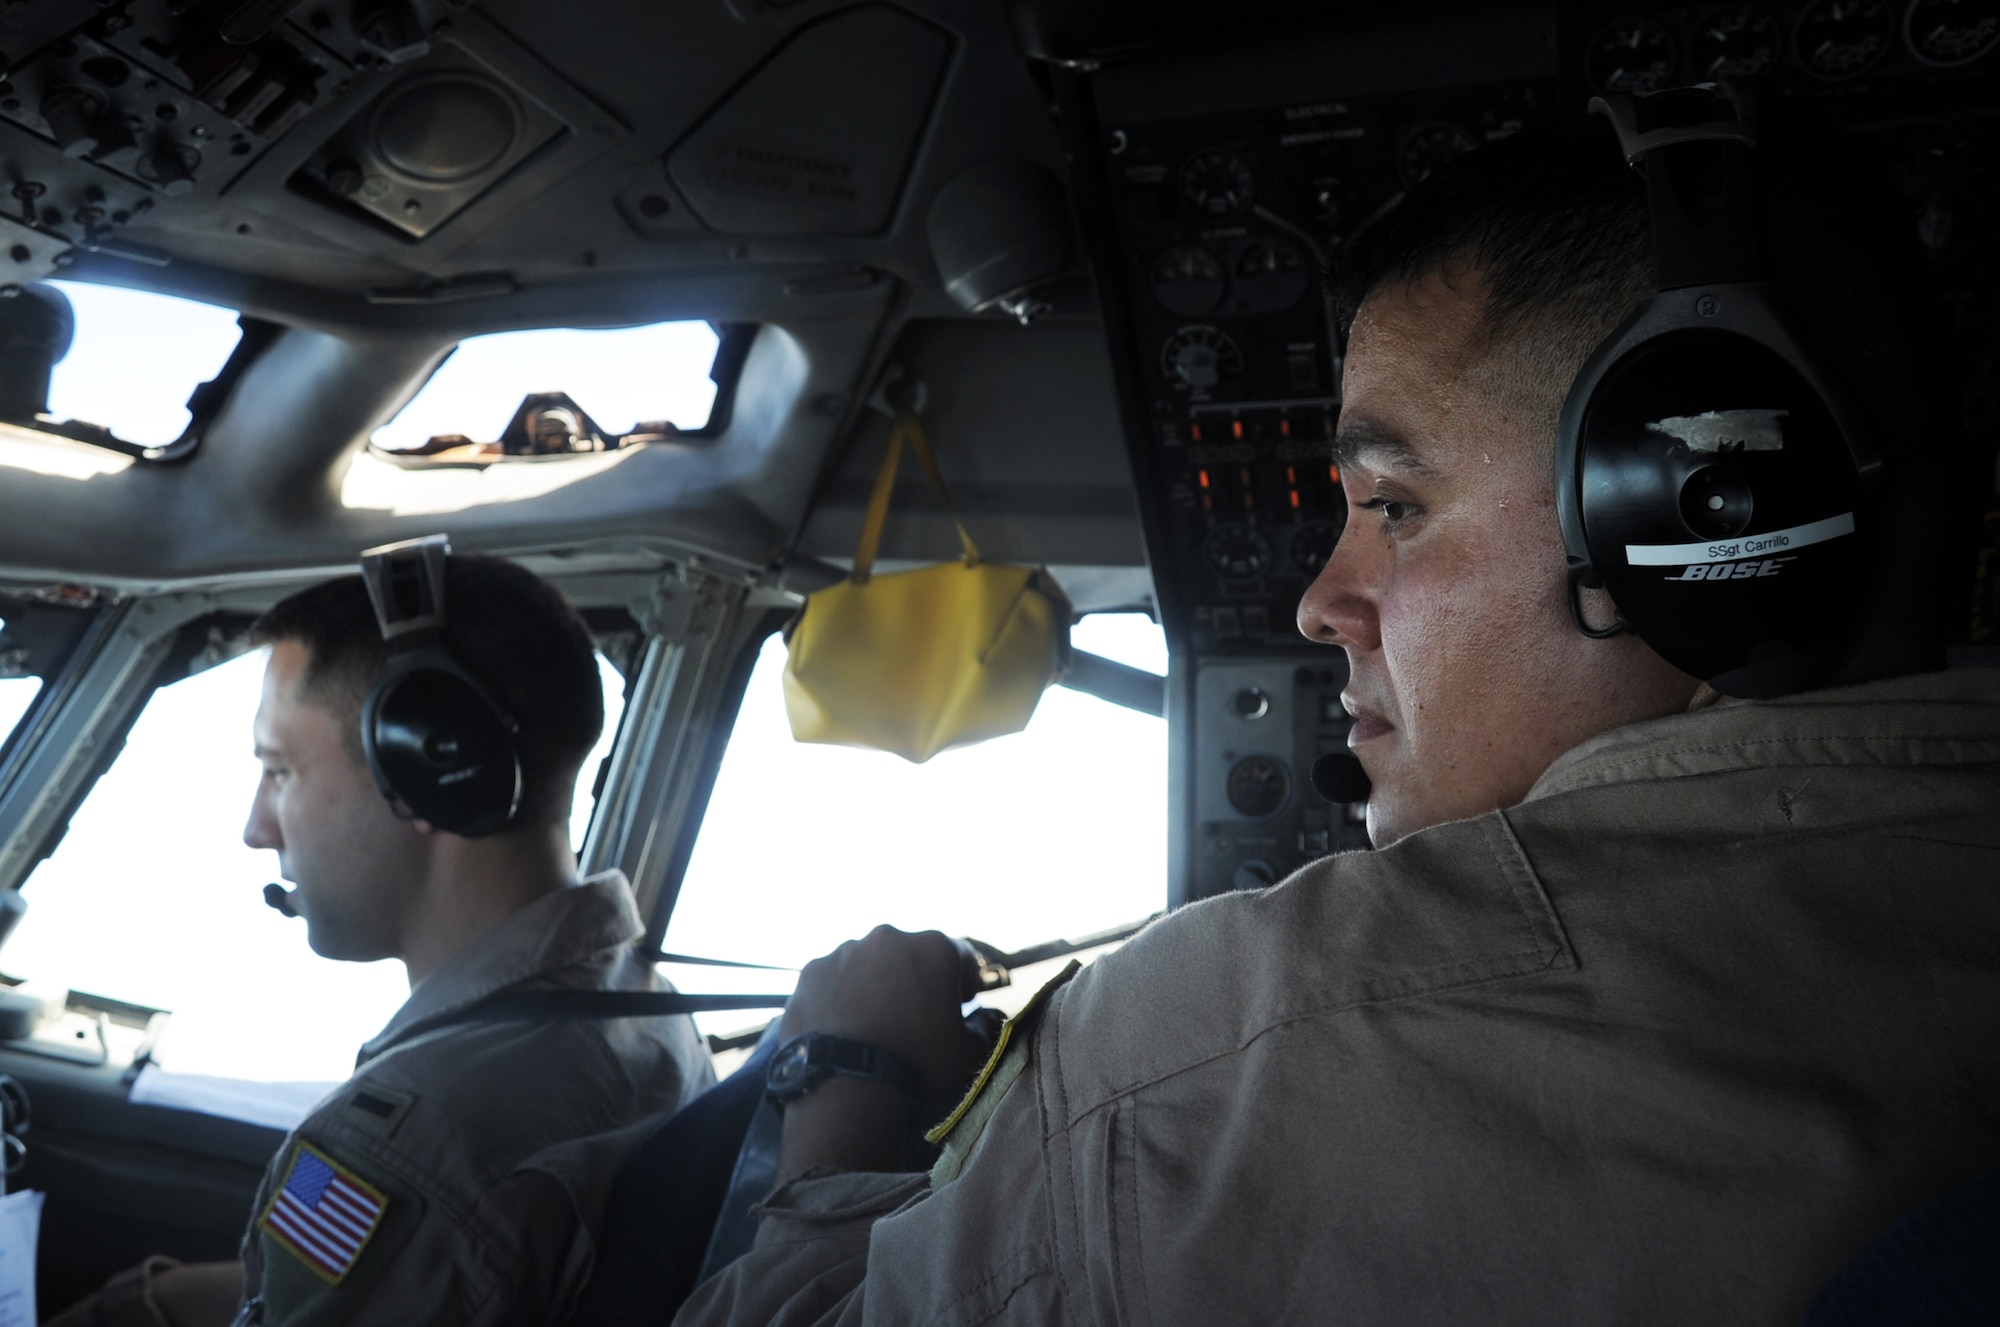 First Lt. Anthony Dorazio, E-3 Sentry Airborne Warning and Control System aircraft co-pilot, and Staff Sgt. Abel Carillo, flight engineer, prepare an E-3 Sentry for a mission during operations at a non-disclosed base in Southwest Asia on Feb. 16, 2010. Both Airmen are deployed with the 965th Expeditionary Aircraft Airborne Air Control Squadron -- part of the 380th Air Expeditionary Wing. Their home station is Tinker Air Force Base, Okla. Lieutenant Dorazio's hometown is Clovis, N.M., and Sergeant Carillo's hometown is San Antonio, Texas. (U.S. Air Force Photo/Master Sgt. Scott T. Sturkol/Released)